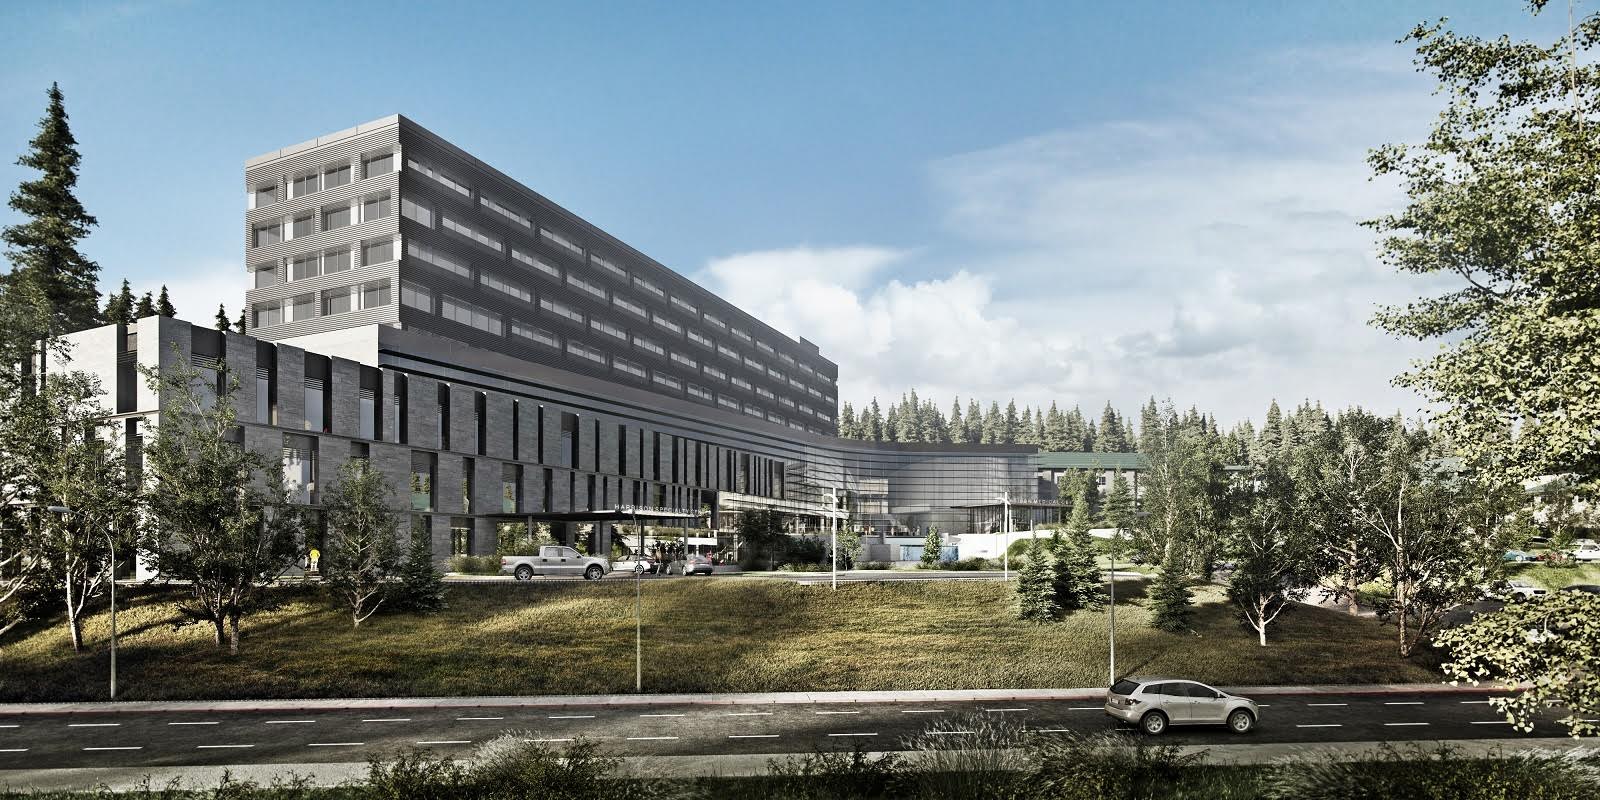 Artist's rendering of CHI Franciscan's proposed hospital at Harrison Medical Center in Silverdale. Credit: CHI Franciscan Health